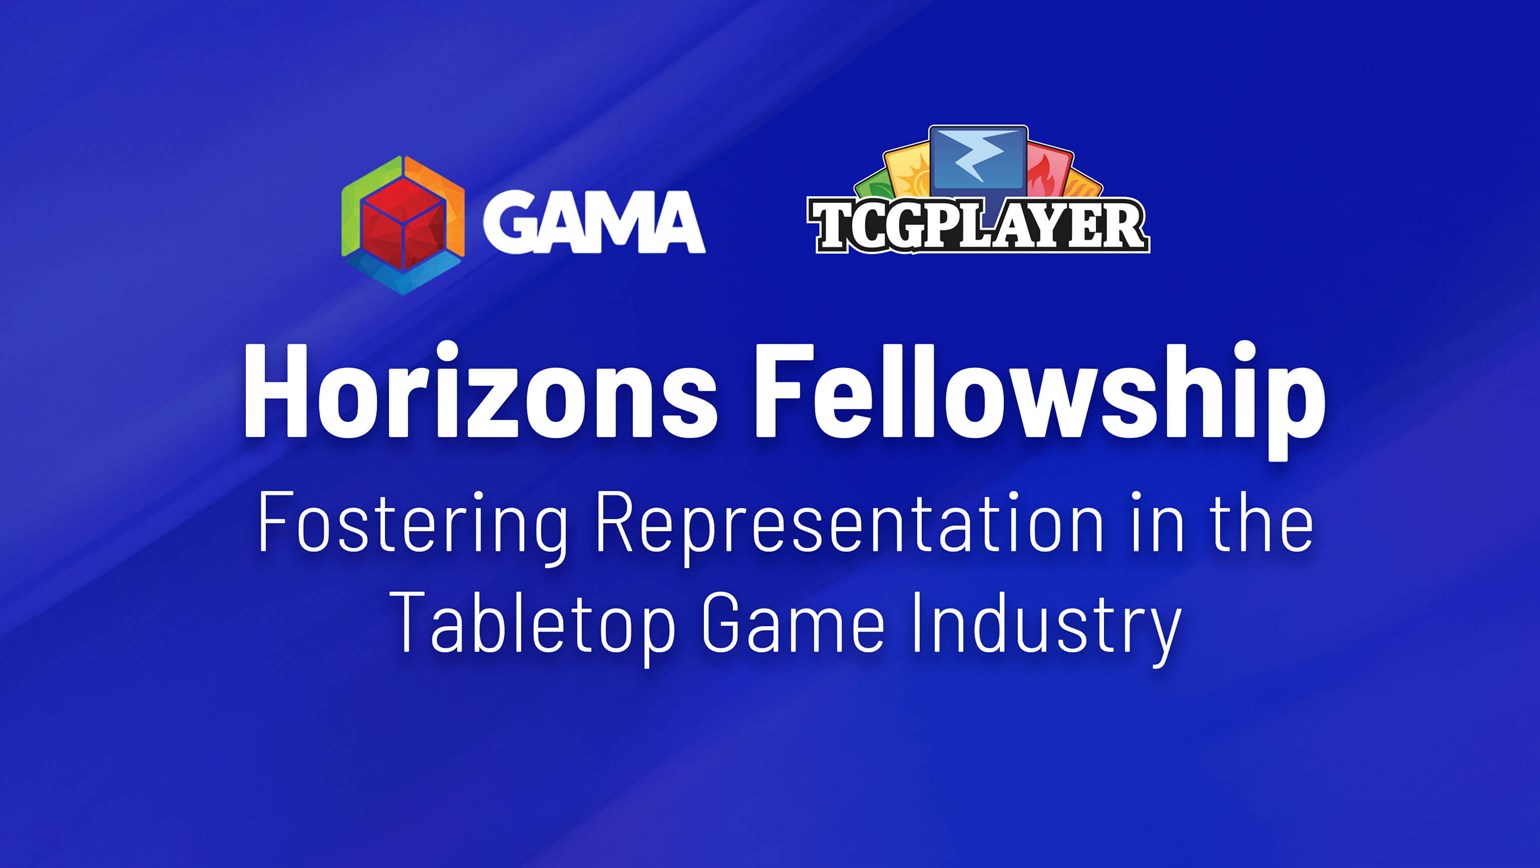 TCGplayer Partners with GAMA to Sponsor Emerging Retailers